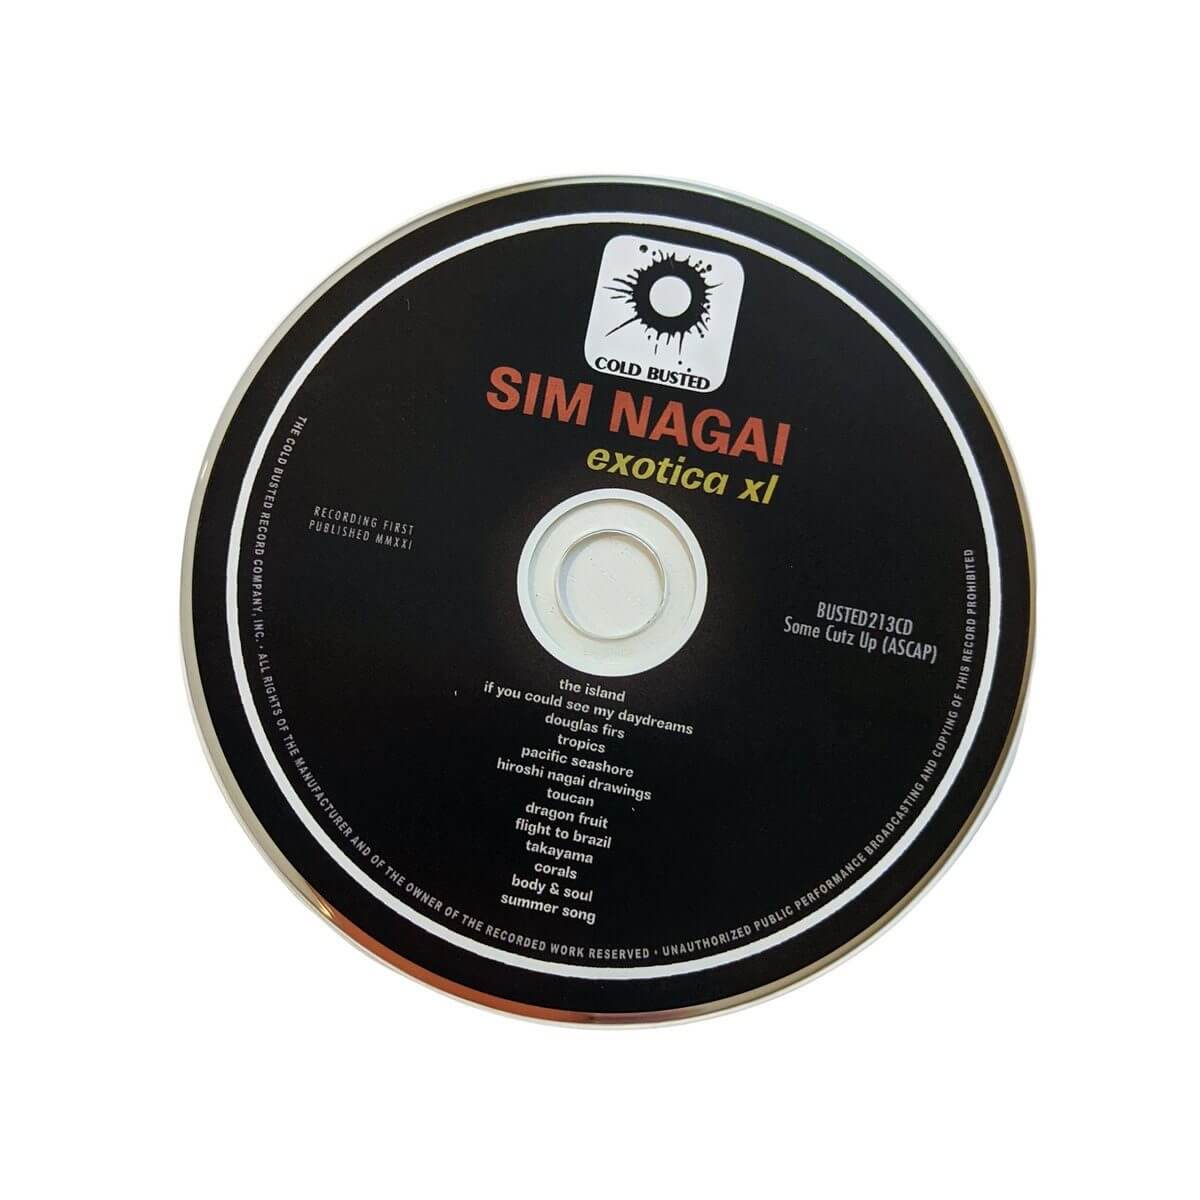 Sim Nagai - Exotica XL - Limited Edition Compact Disc - Cold Busted